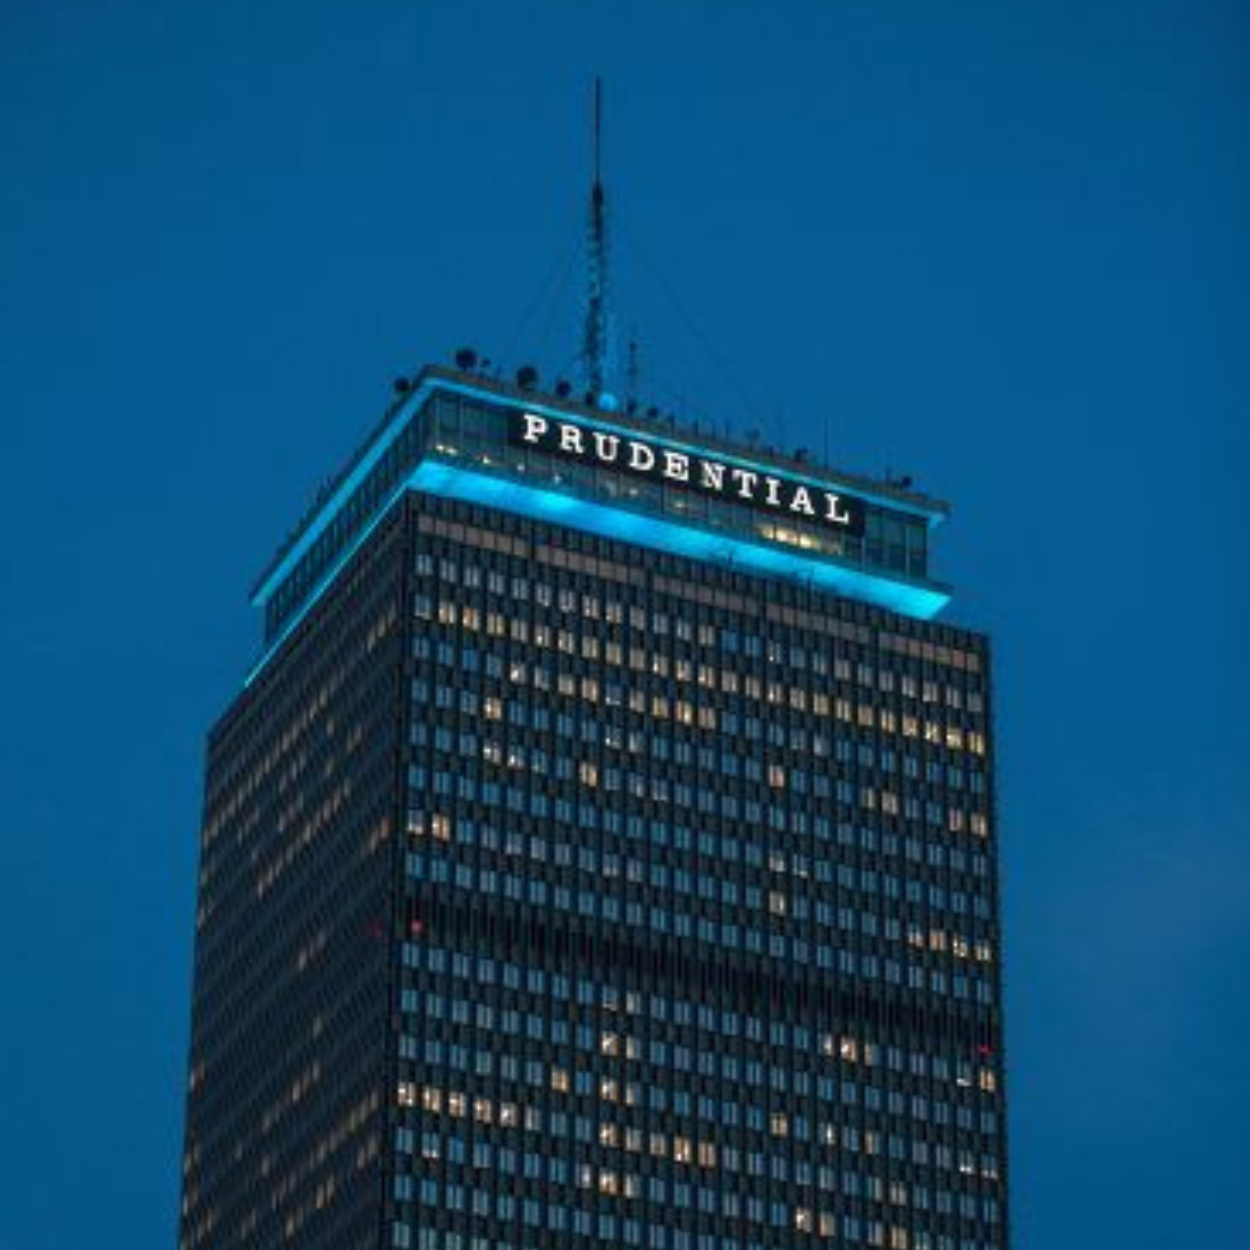 Prudential Tower lit up in teal